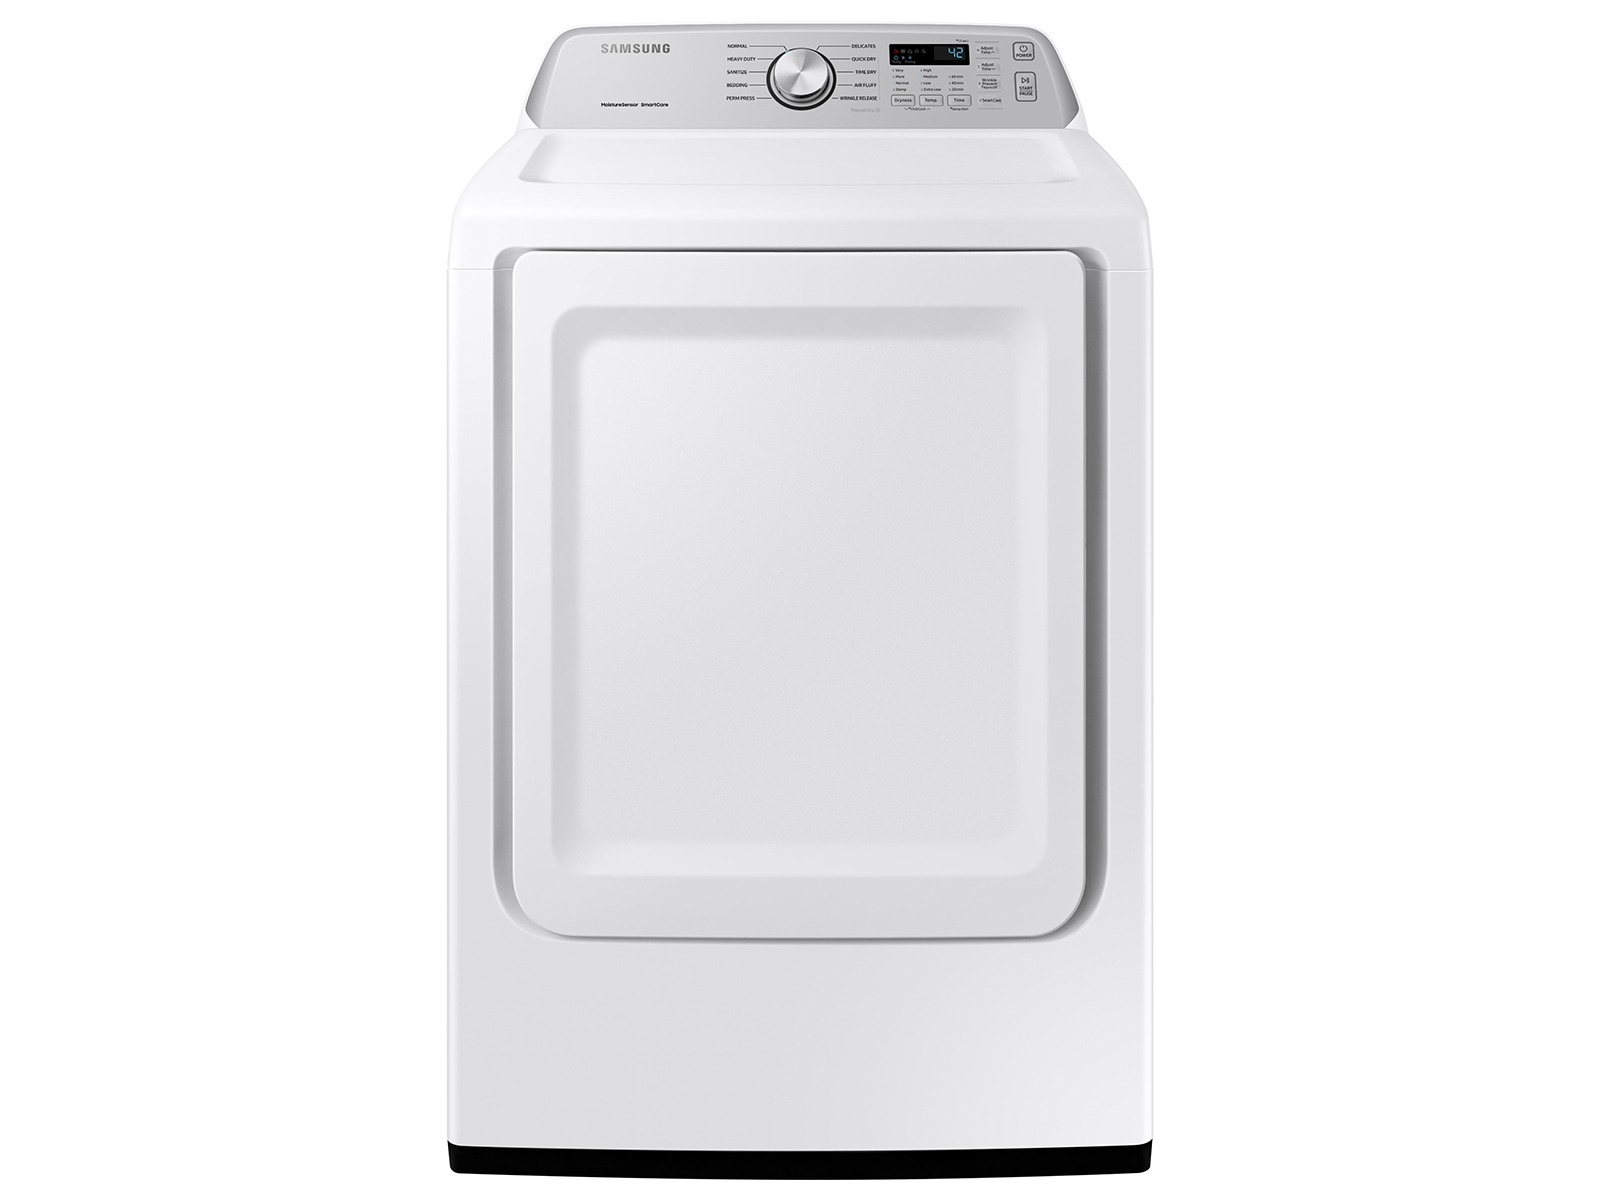 Samsung 7.4 cu. ft. Electric Dryer with Sensor Dry in White(DVE45T3400W/A3)